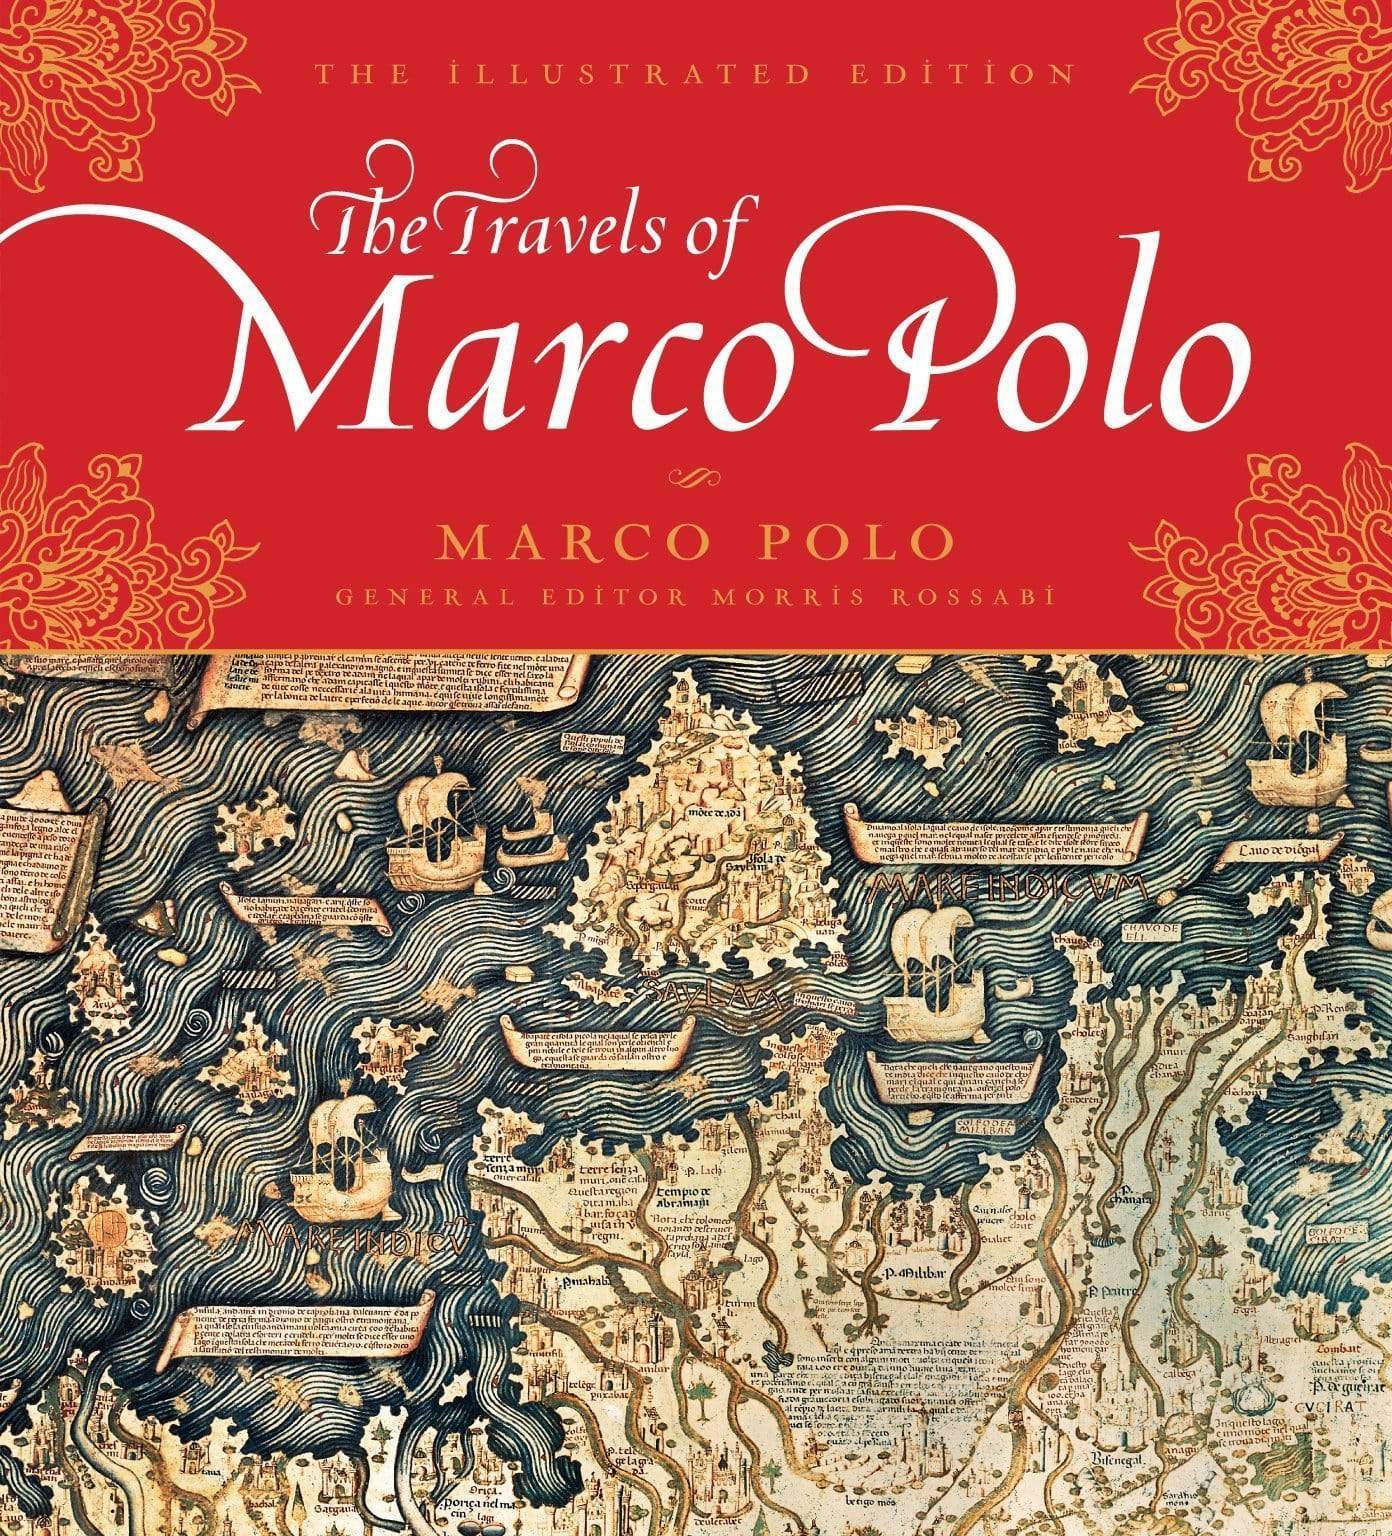 marco polo book of travels